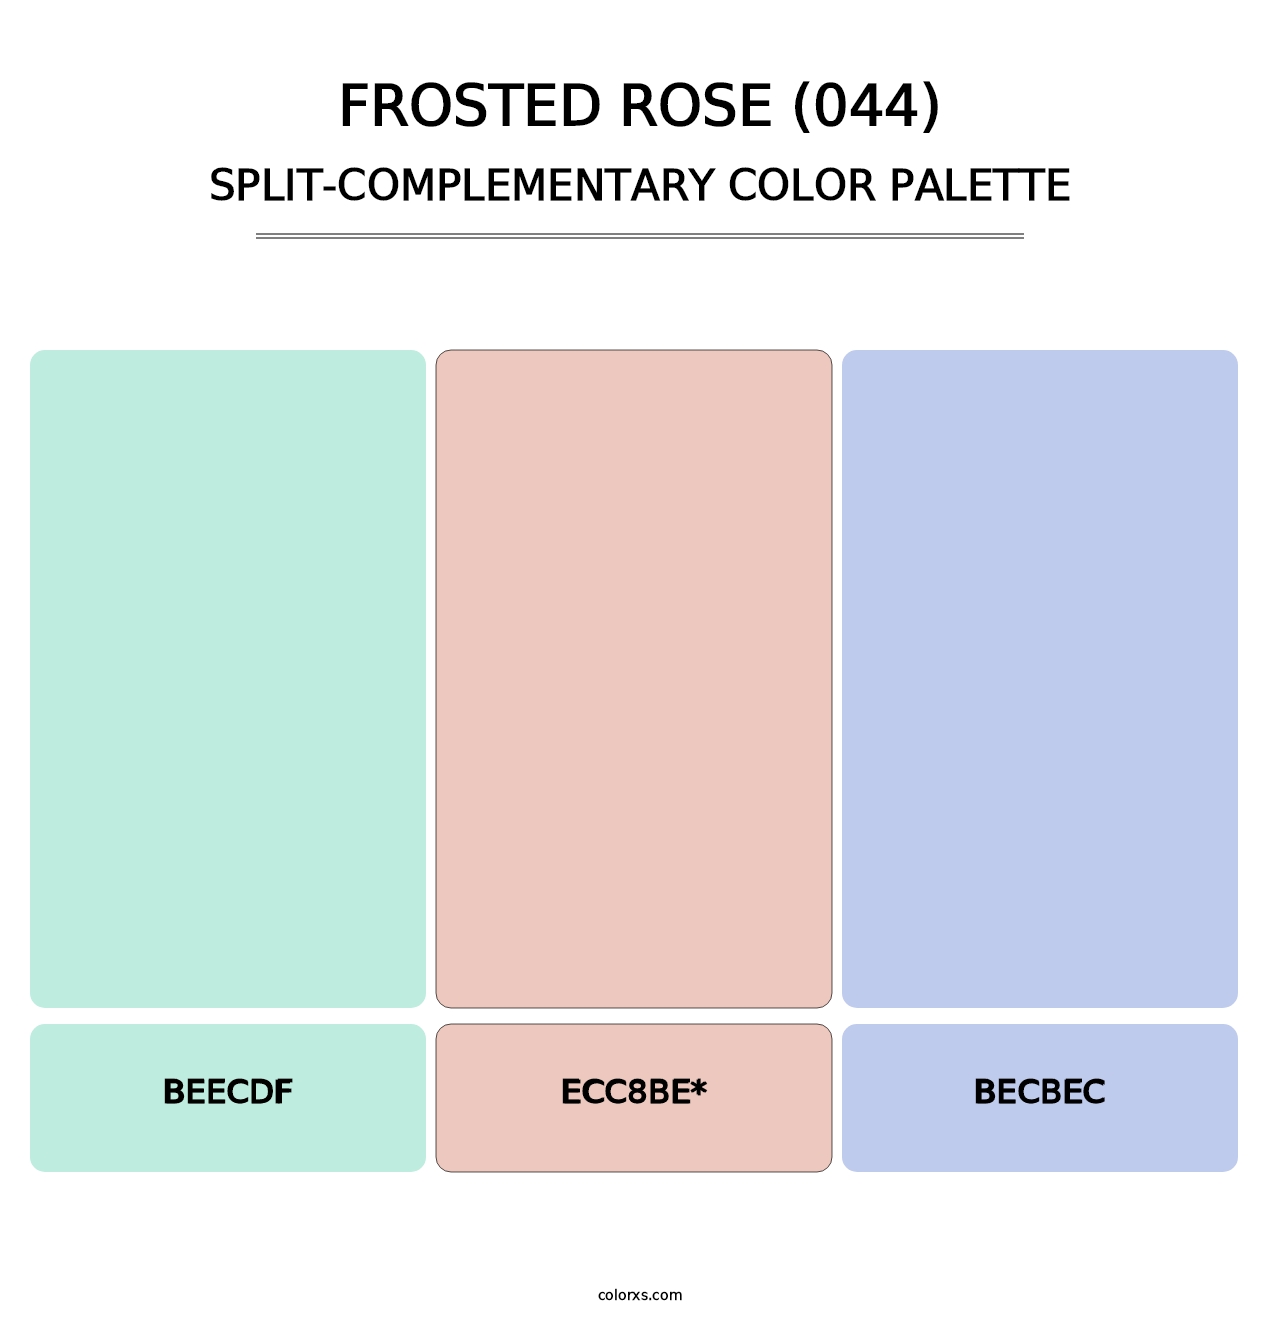 Frosted Rose (044) - Split-Complementary Color Palette